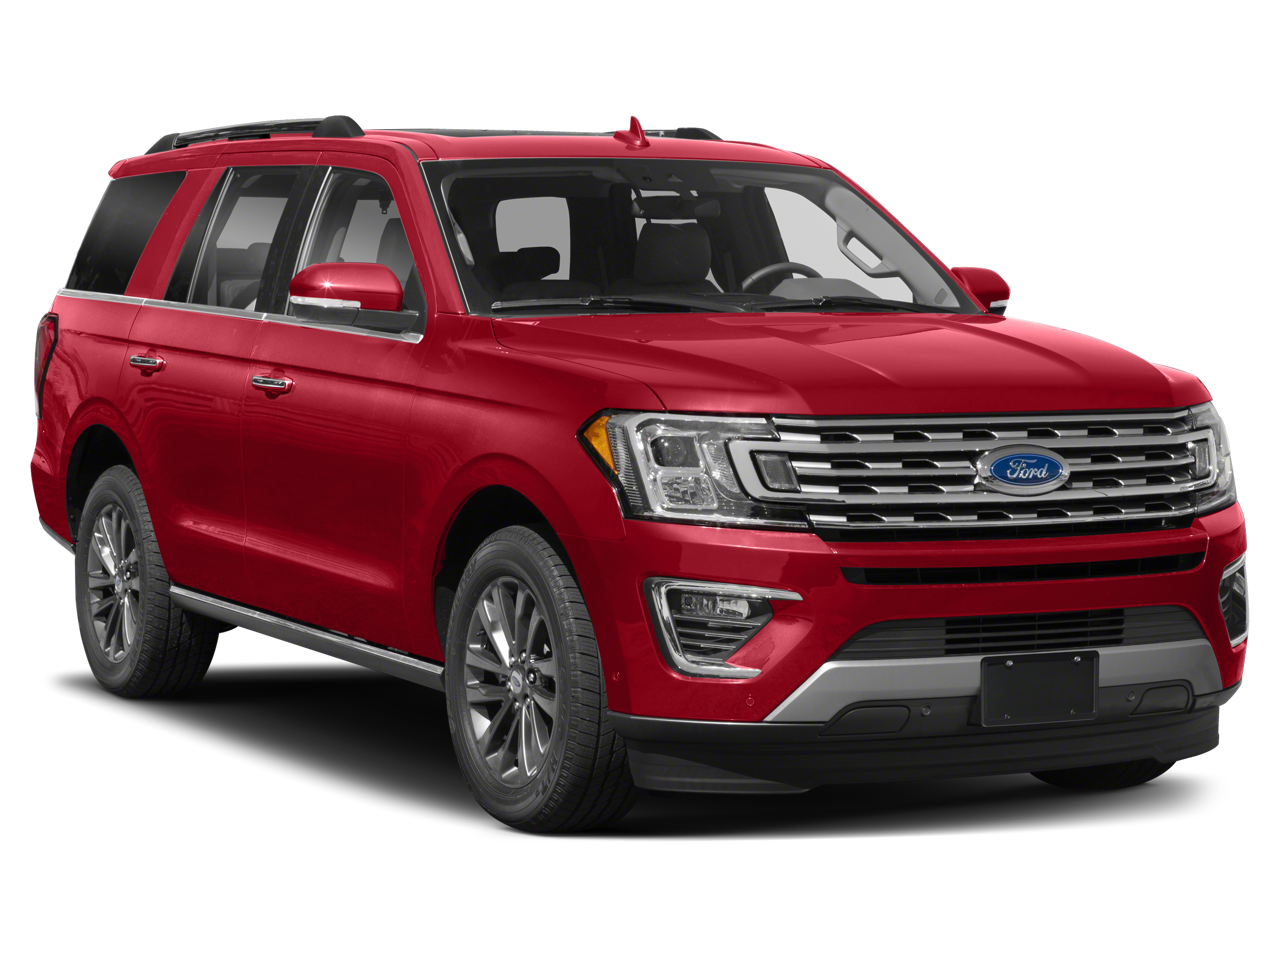 2020 Ford Expedition Limited NAVIGATION HEATED LEATHER PANORAMIC MOONROOF BLIS